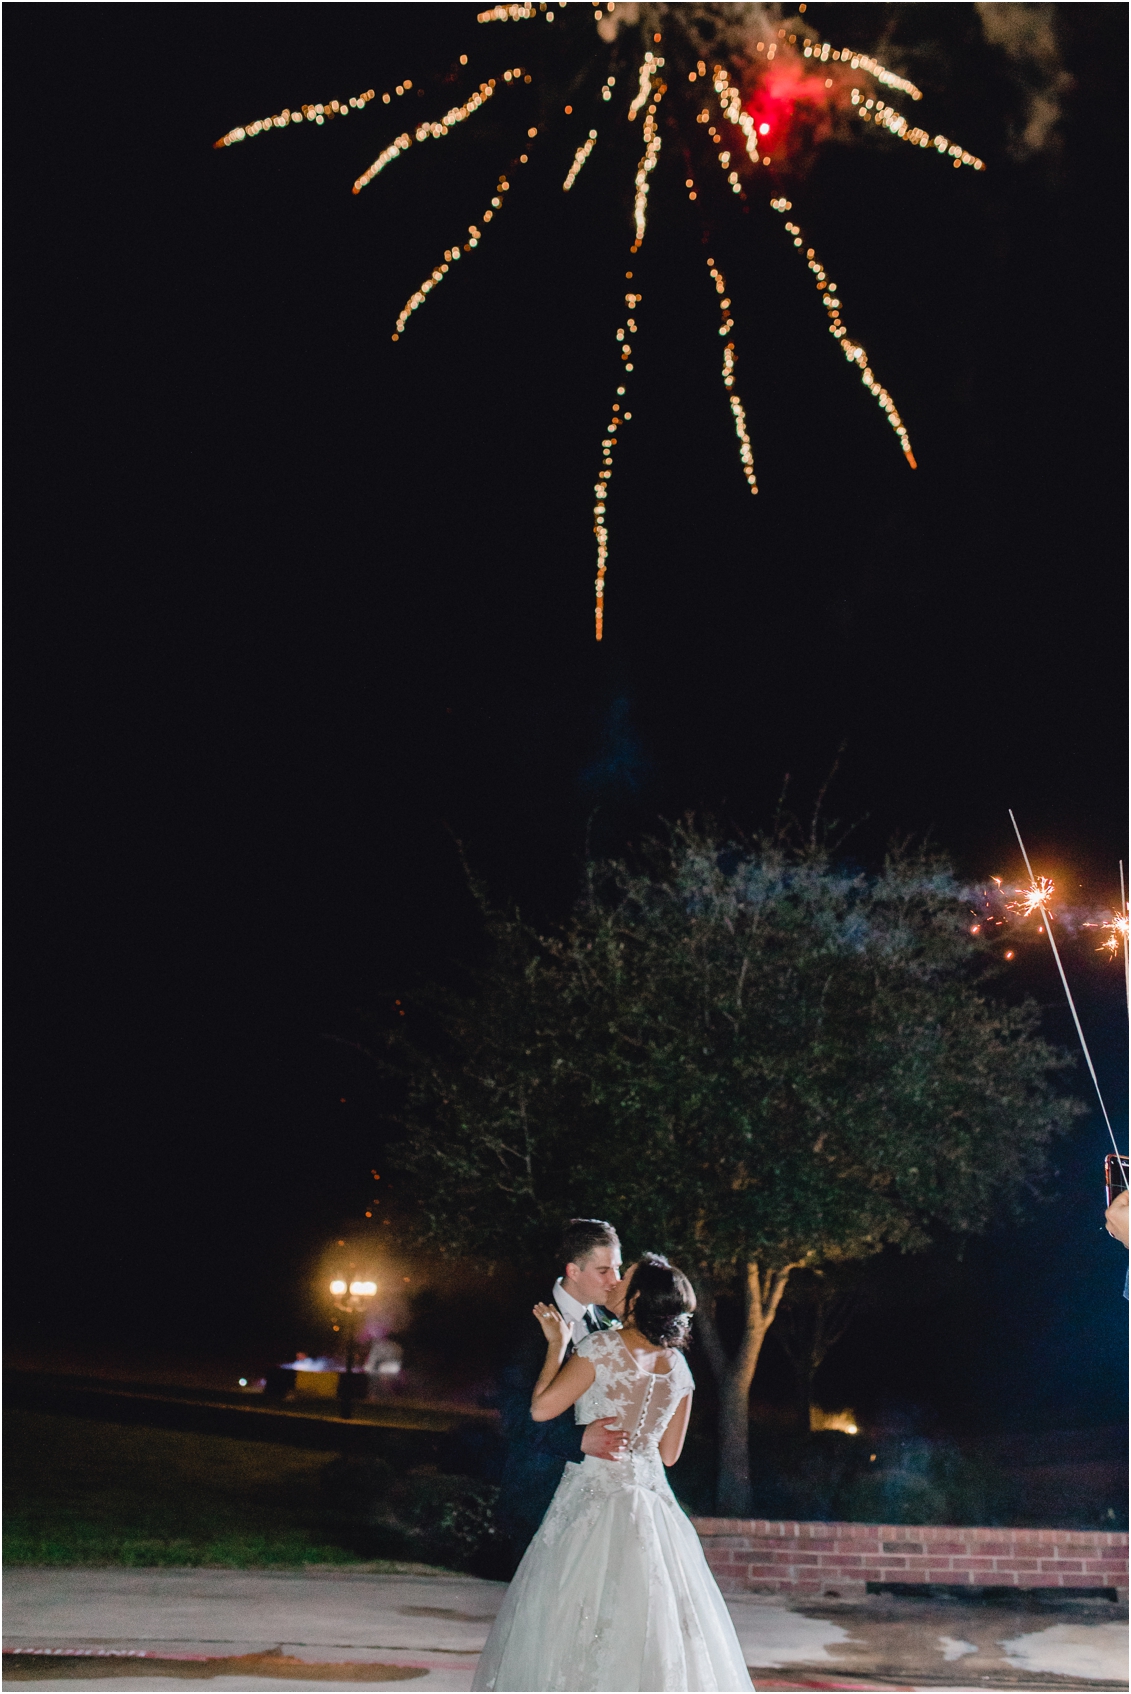 A Wedding at the Milestone in Denton, Texas by Gaby Caskey Photography, wedding fireworks exit